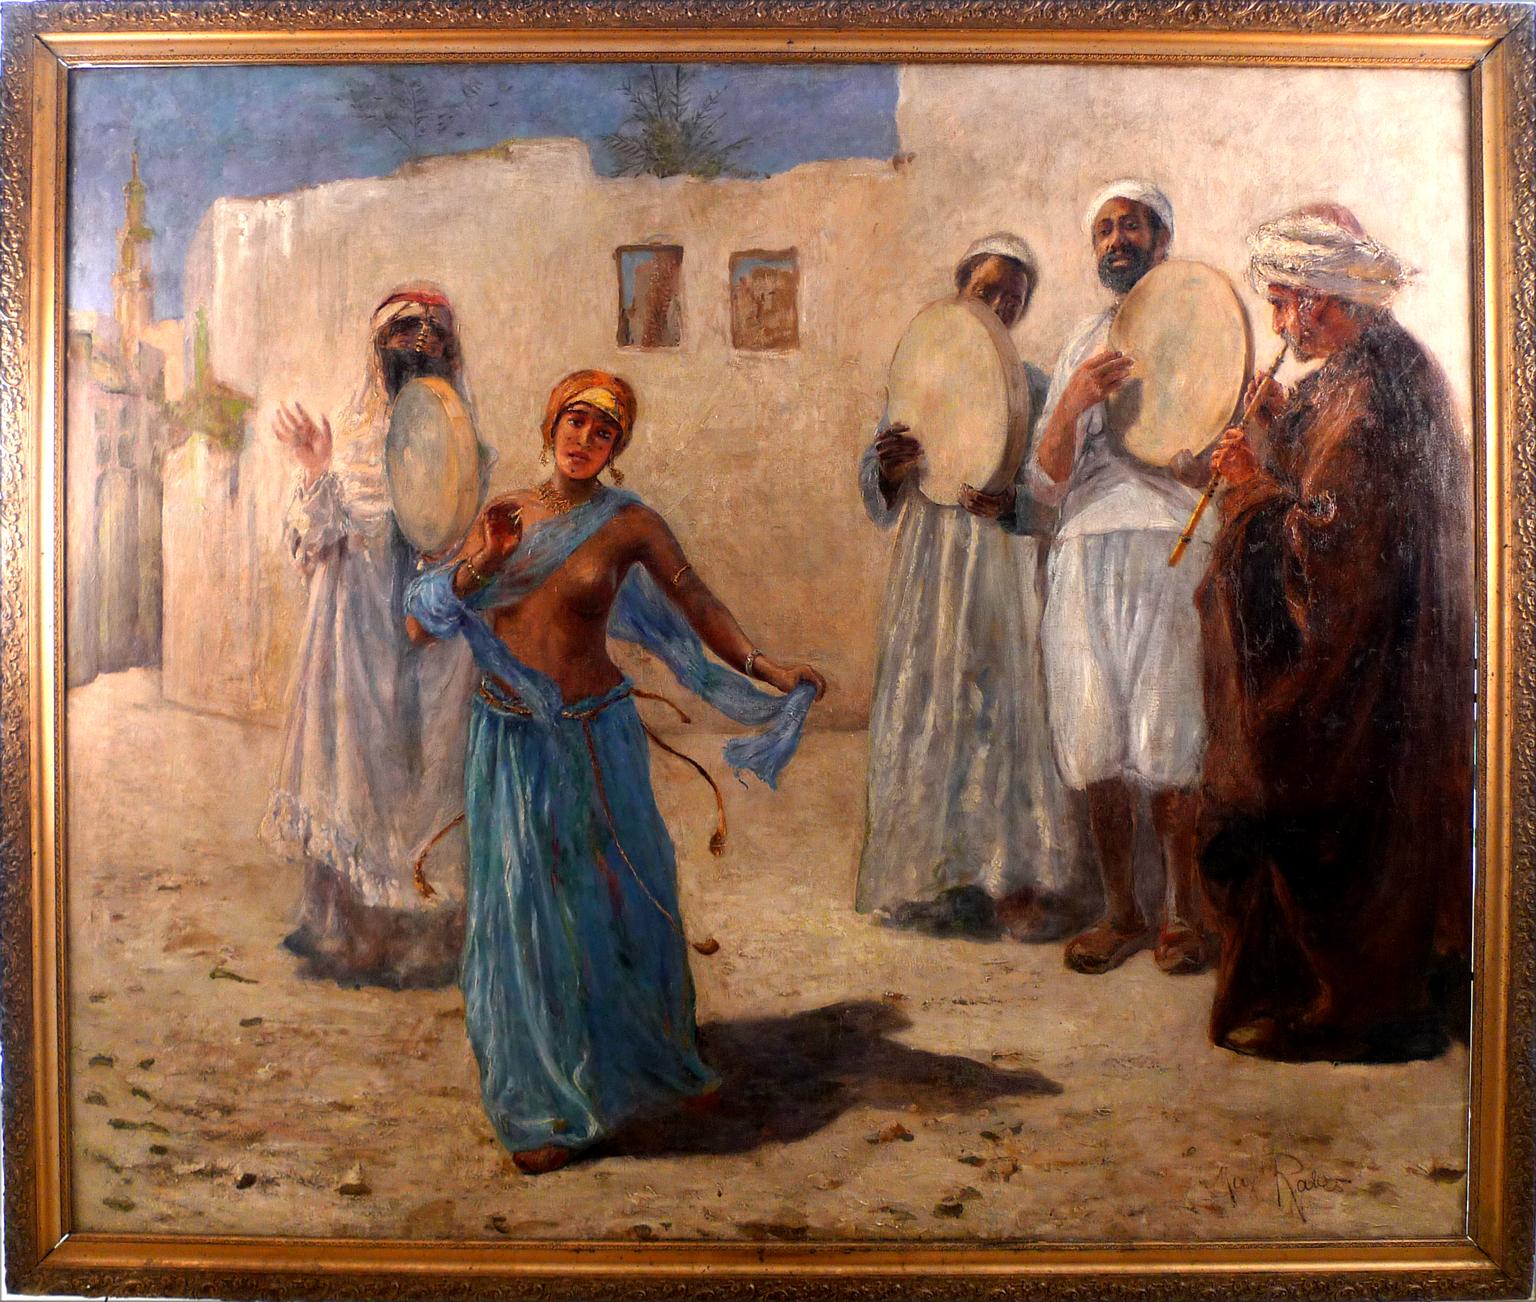 Max Rabes Landscape Painting - “An Orientalist Scene with Musicians and Dancer”, 19th C. Oil/Canvas by M. Rabes